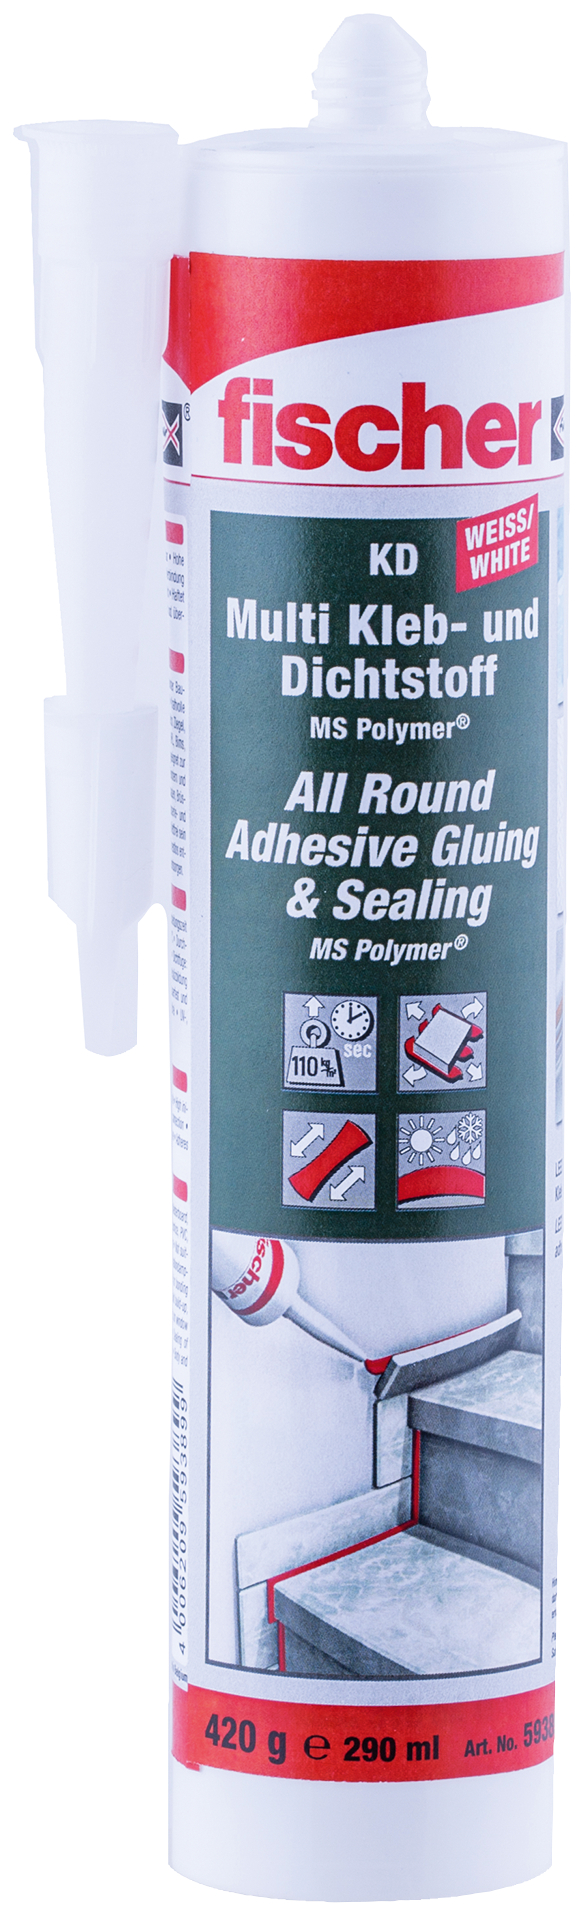 All-round gluing and sealing adhesive Premium KD